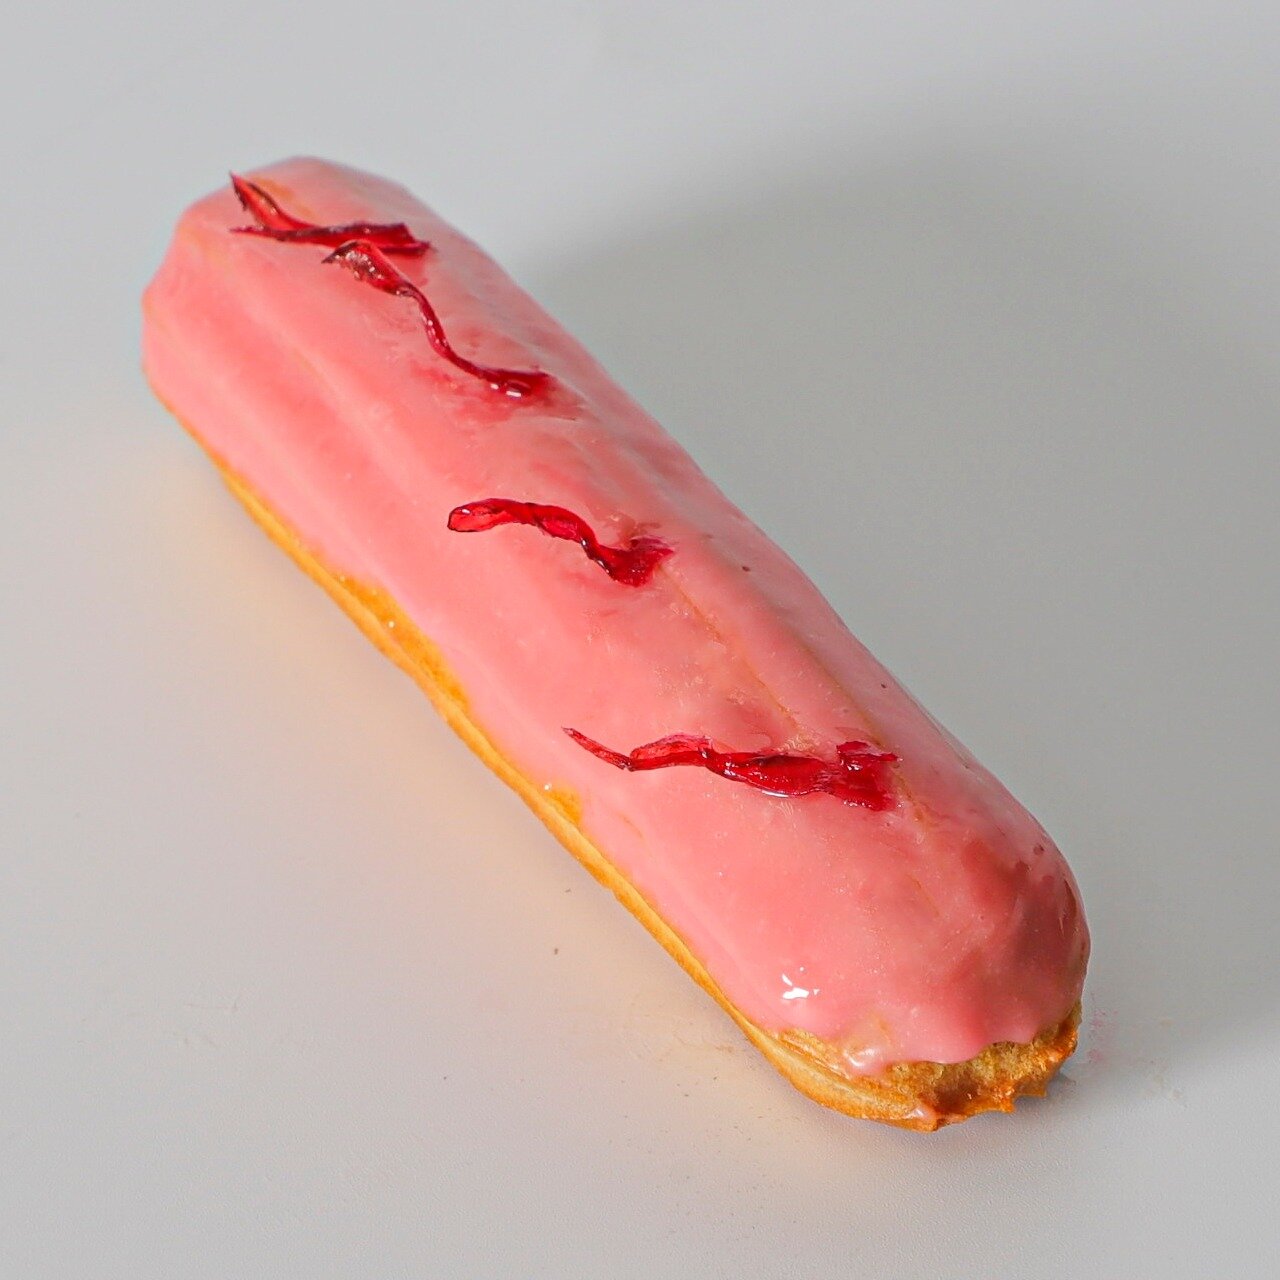 Rose Roselle Eclair
We have an elegant &eacute;clair bursting with the floral and fruity flavors of hibiscus. With a hibiscus cream filling that will leave you feeling like you're in a tropical paradise and a strawberry glaze sprinkled with candied r